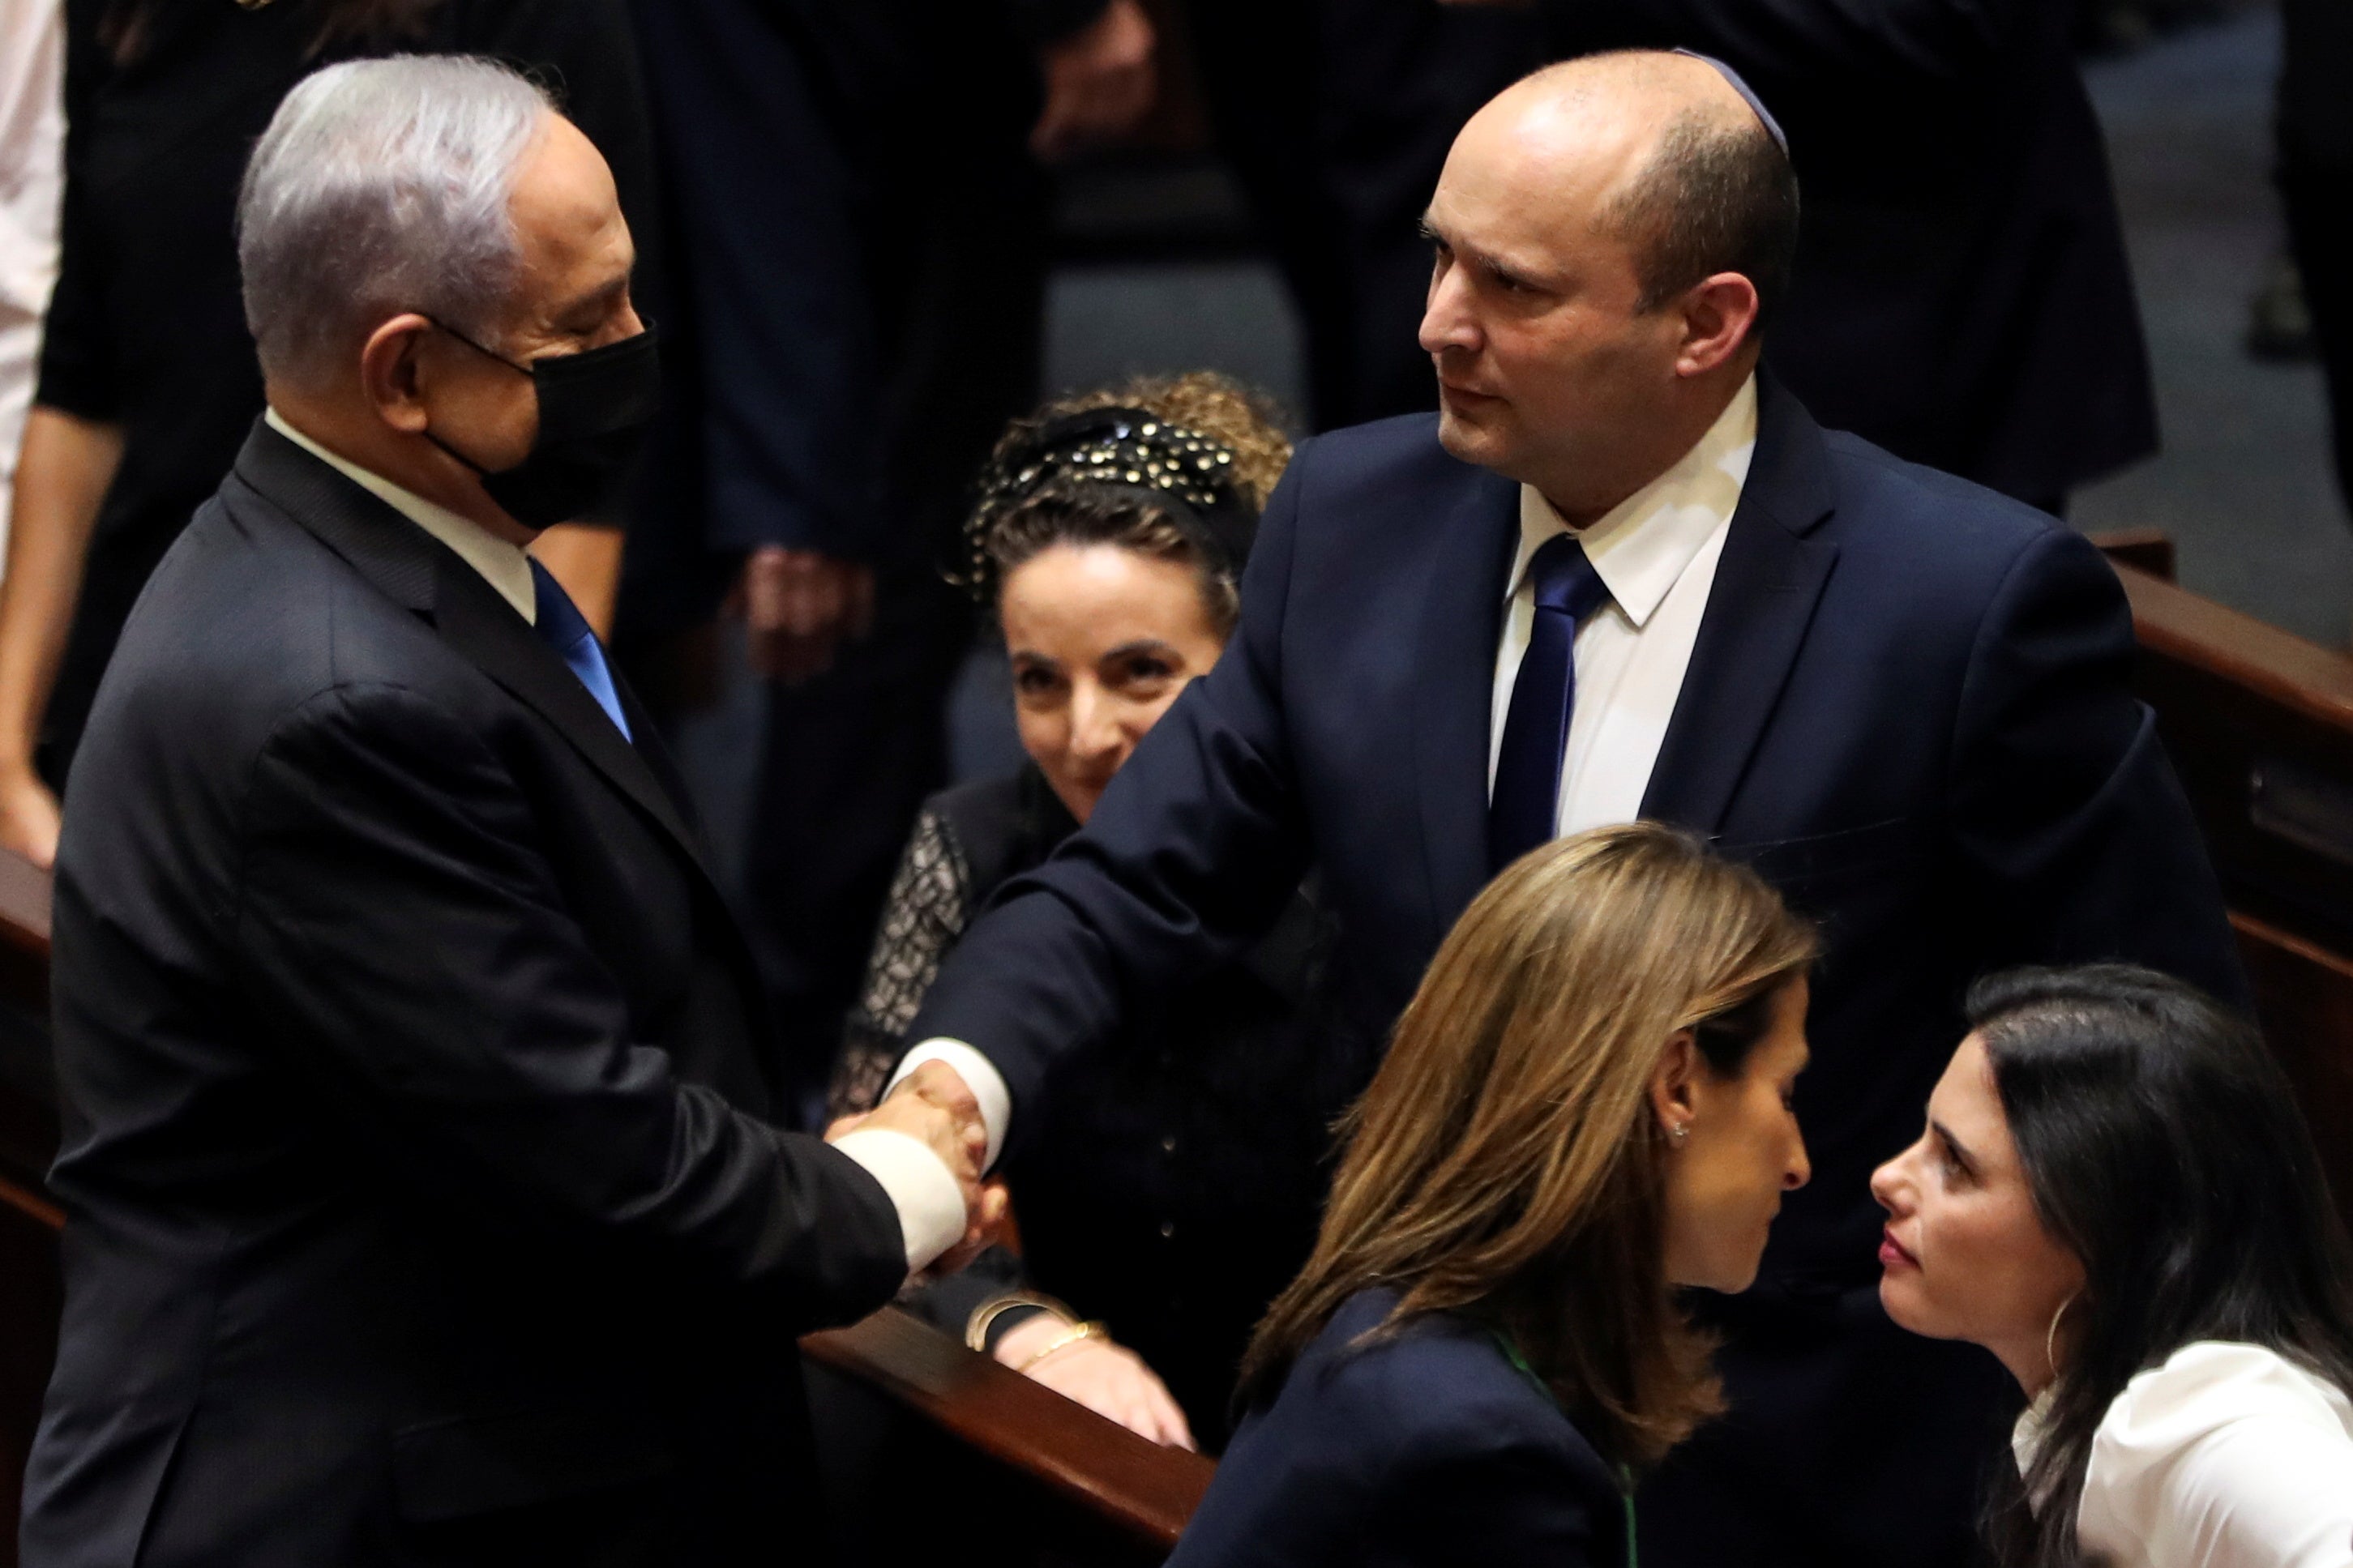 <p>Benjamin Netanyahu shakes hands with the man who has replaced him as Israel Prime Minister, Naftali Bennett, following the vote on the new coalition at the Knesset, Israel’s parliament</p>